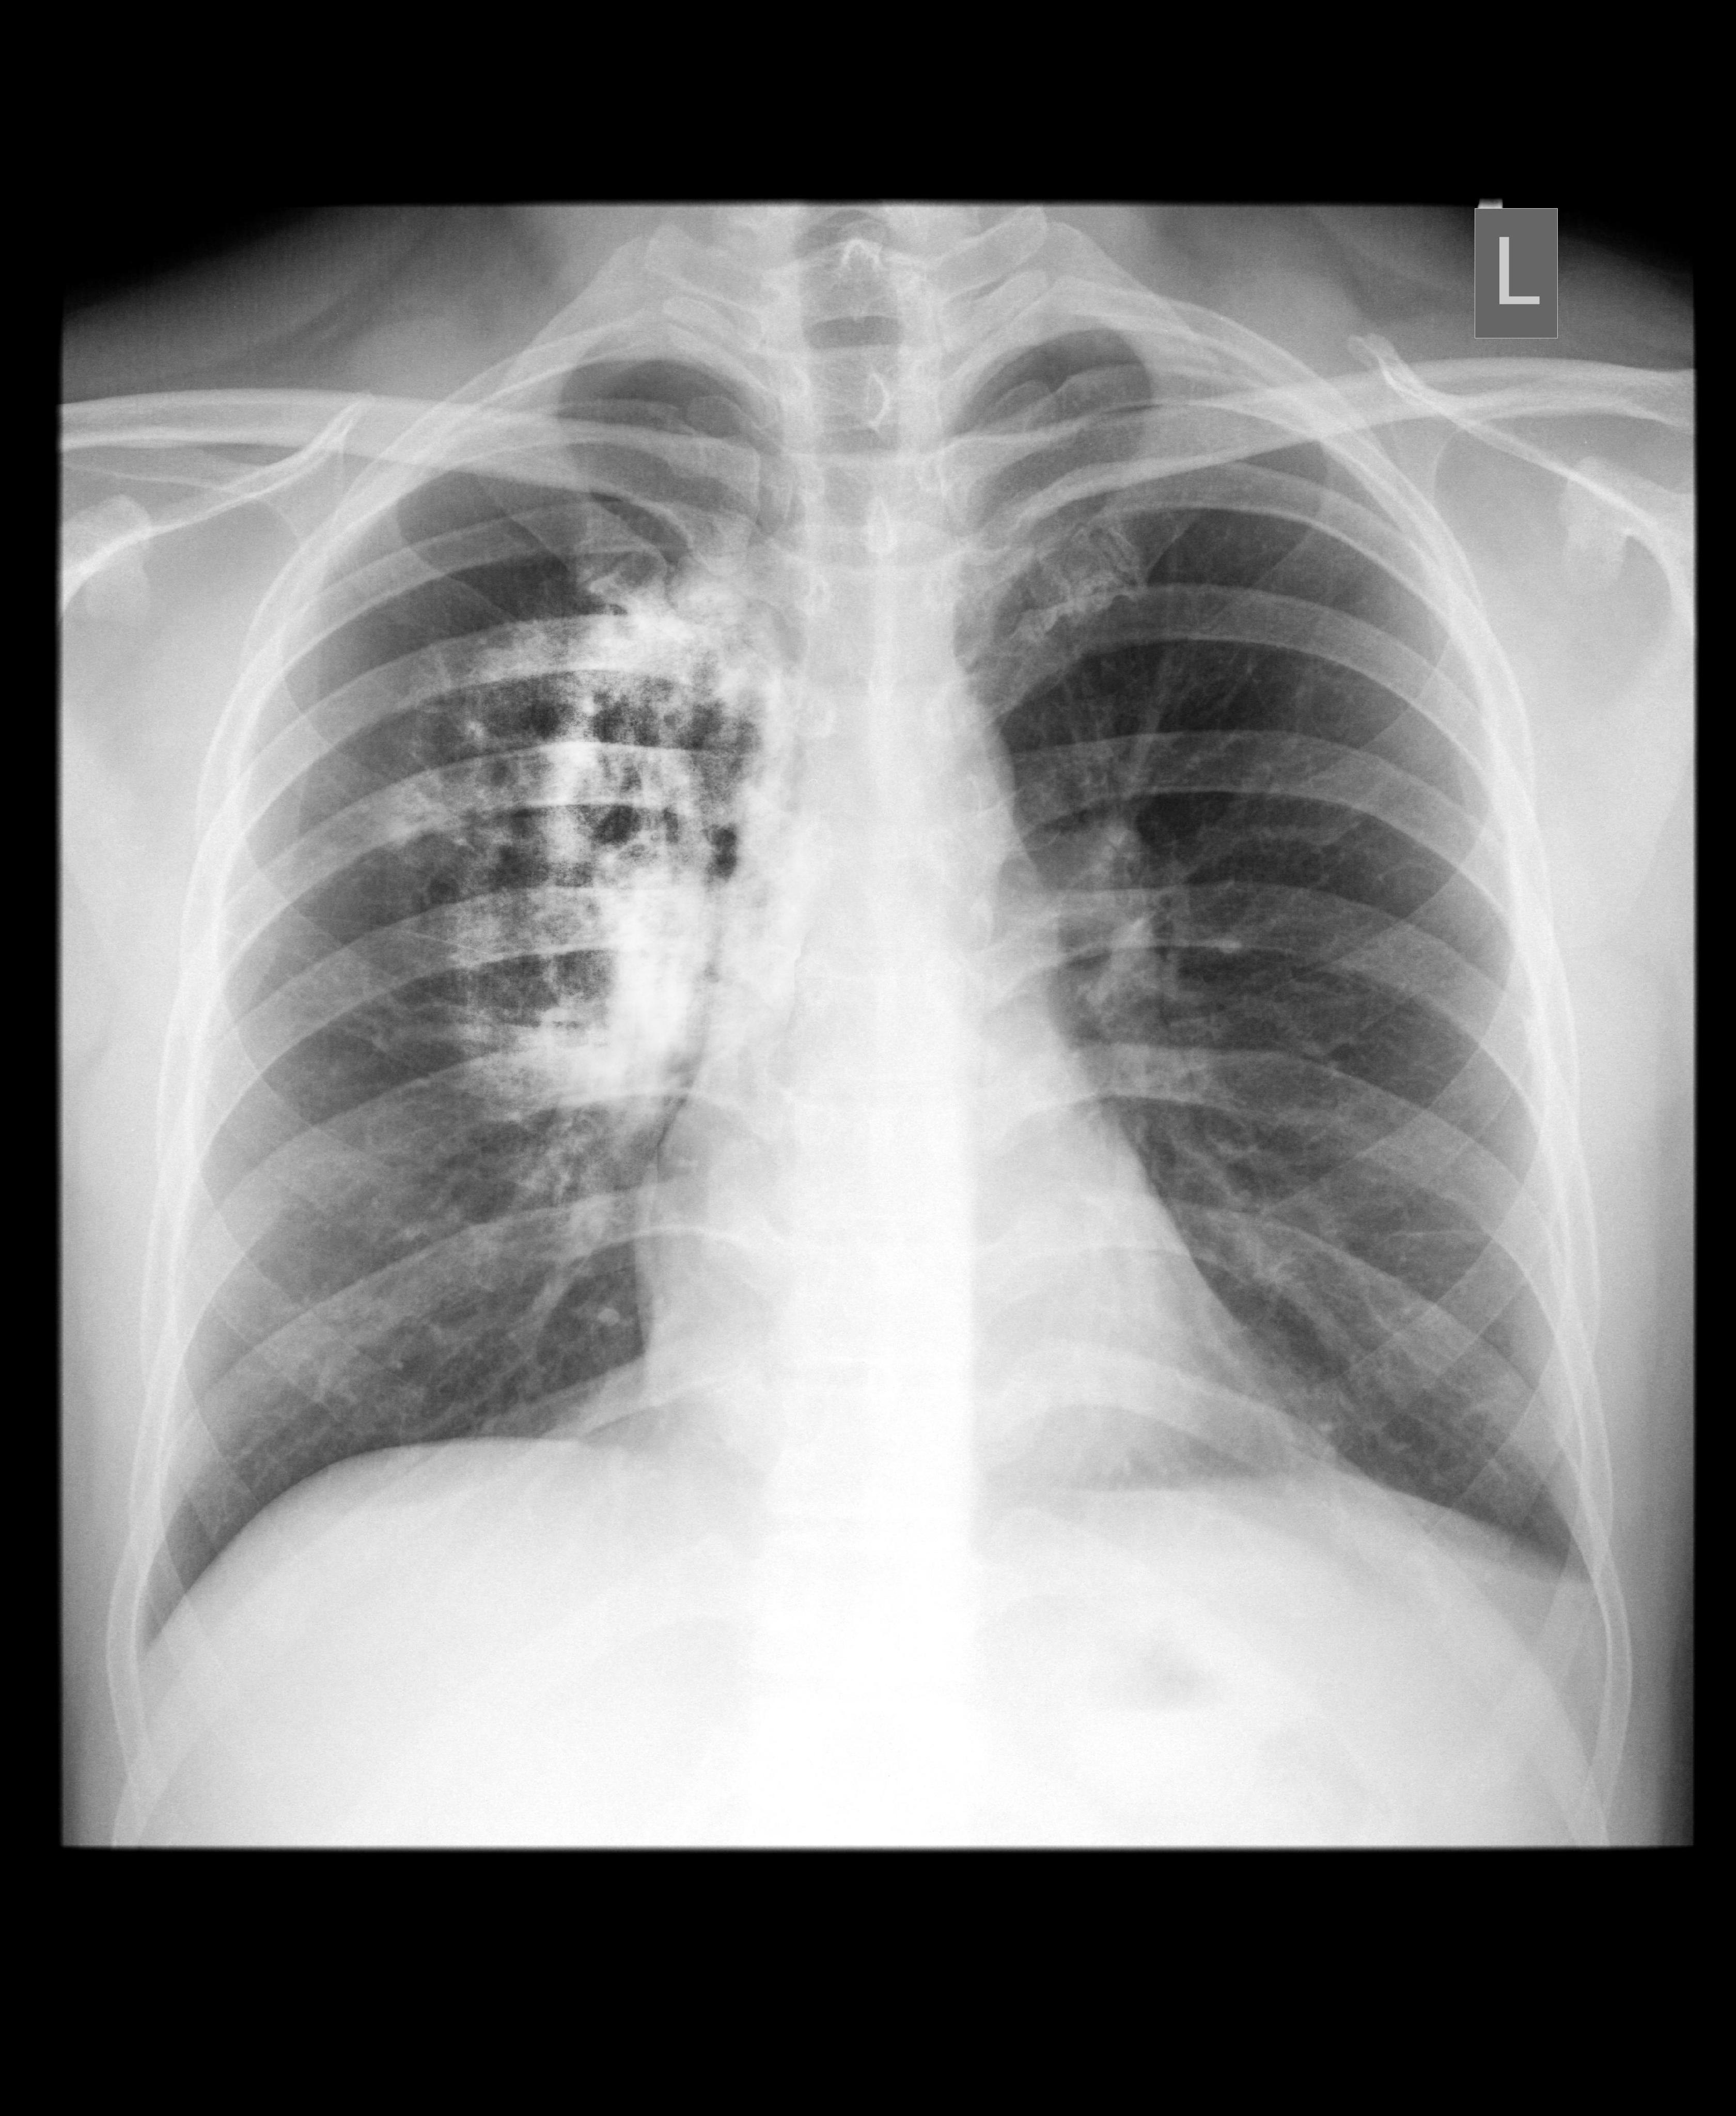 lung cancer pictures images